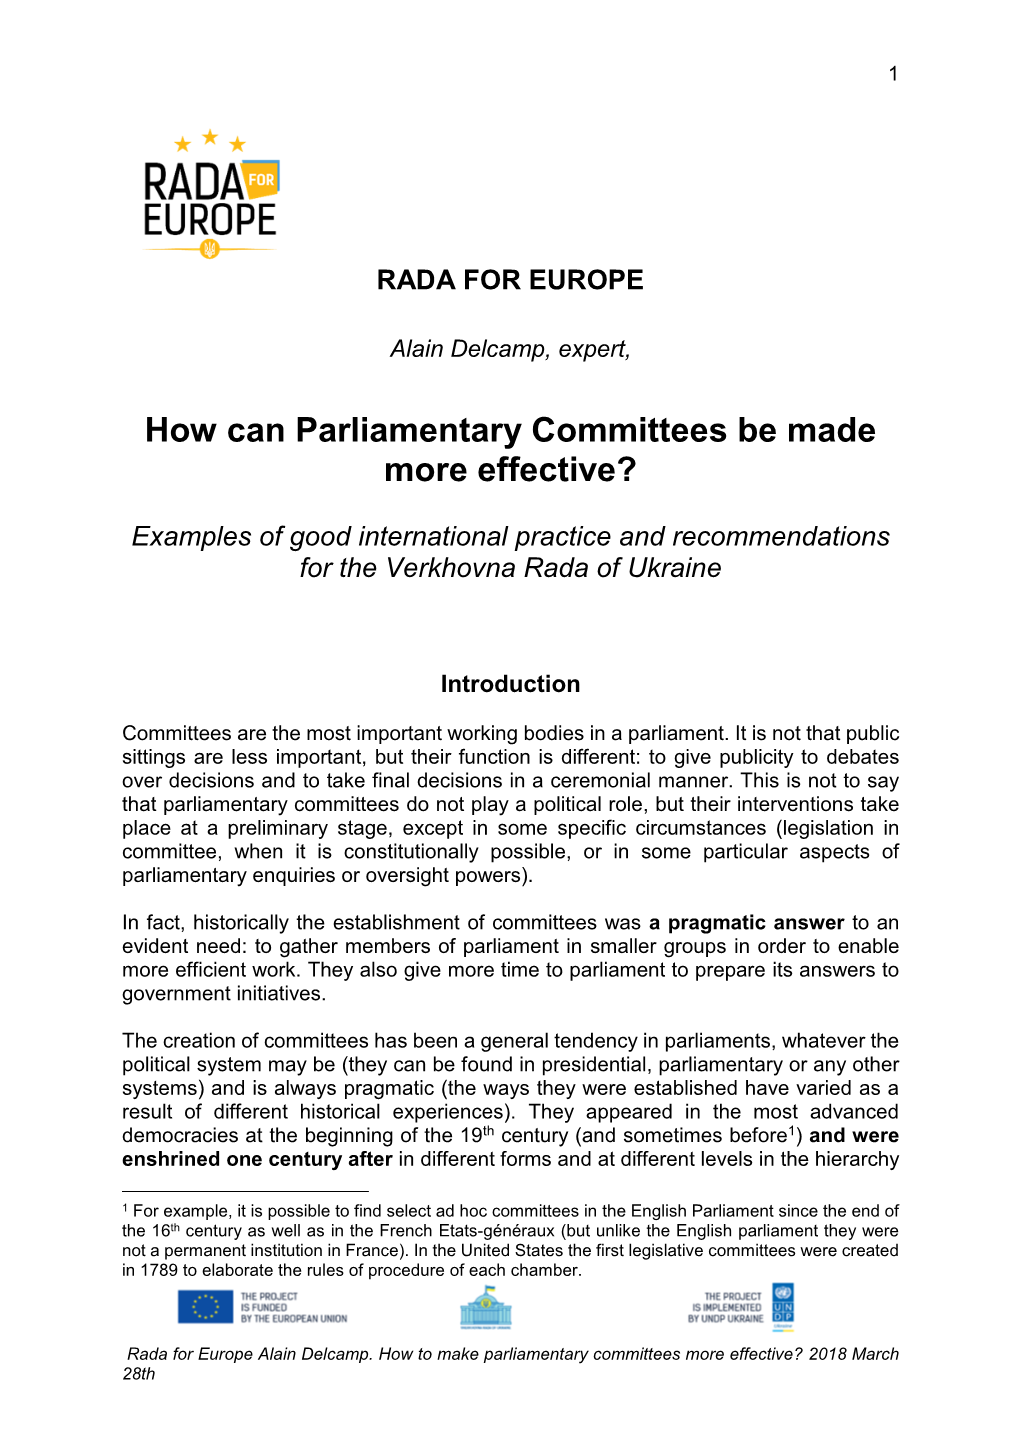 How Can Parliamentary Committees Be Made More Effective?